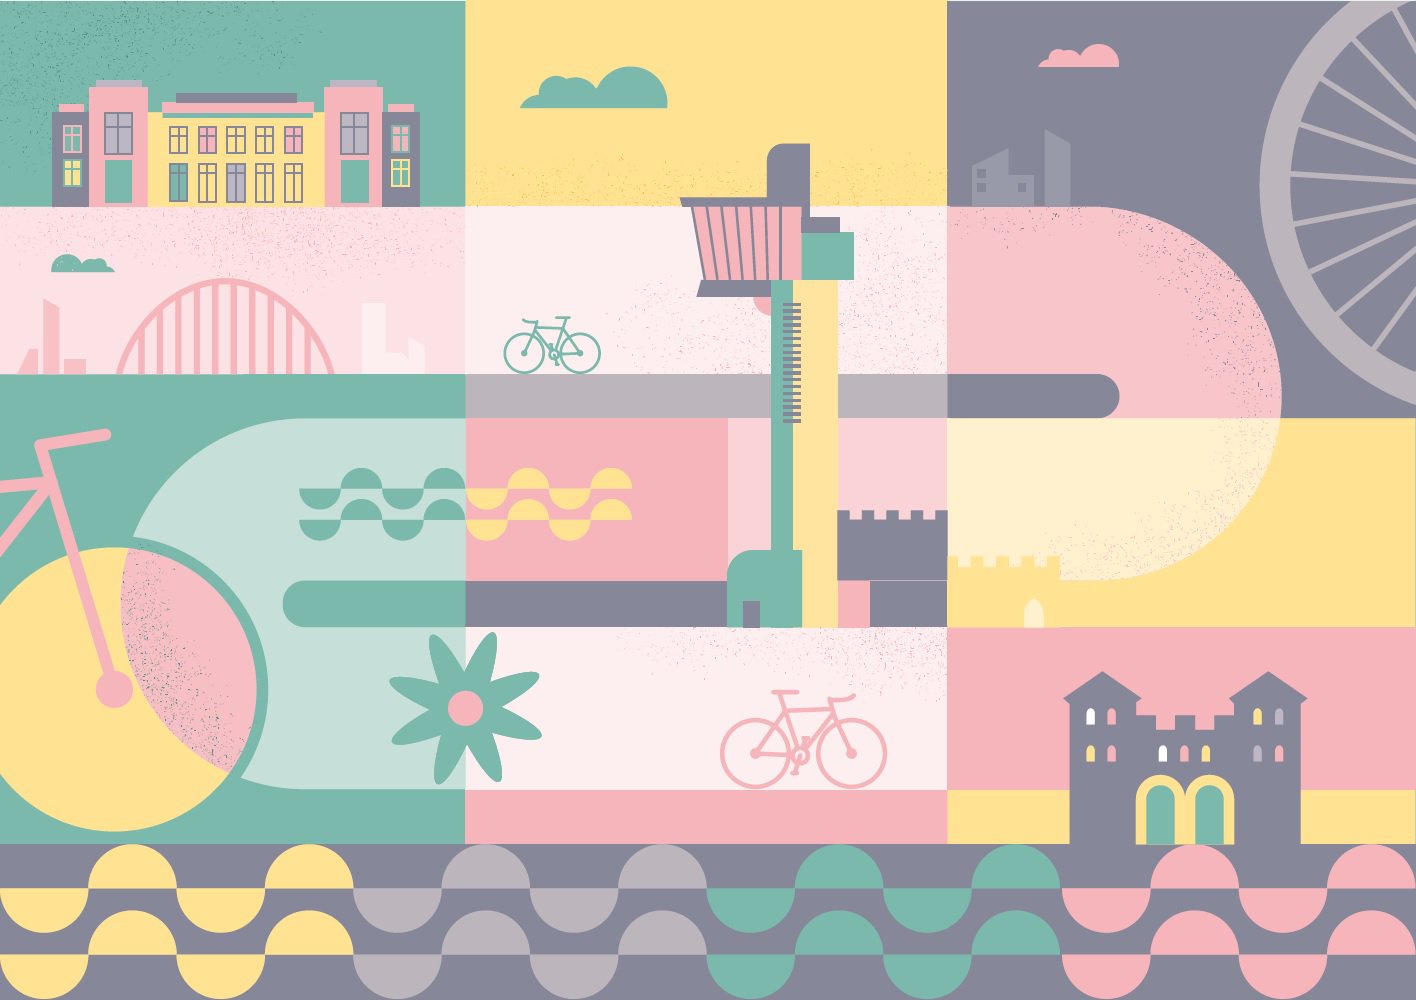 Illustration in muted green, yellow and pink showing a stylised cycle route past museum landmarks.